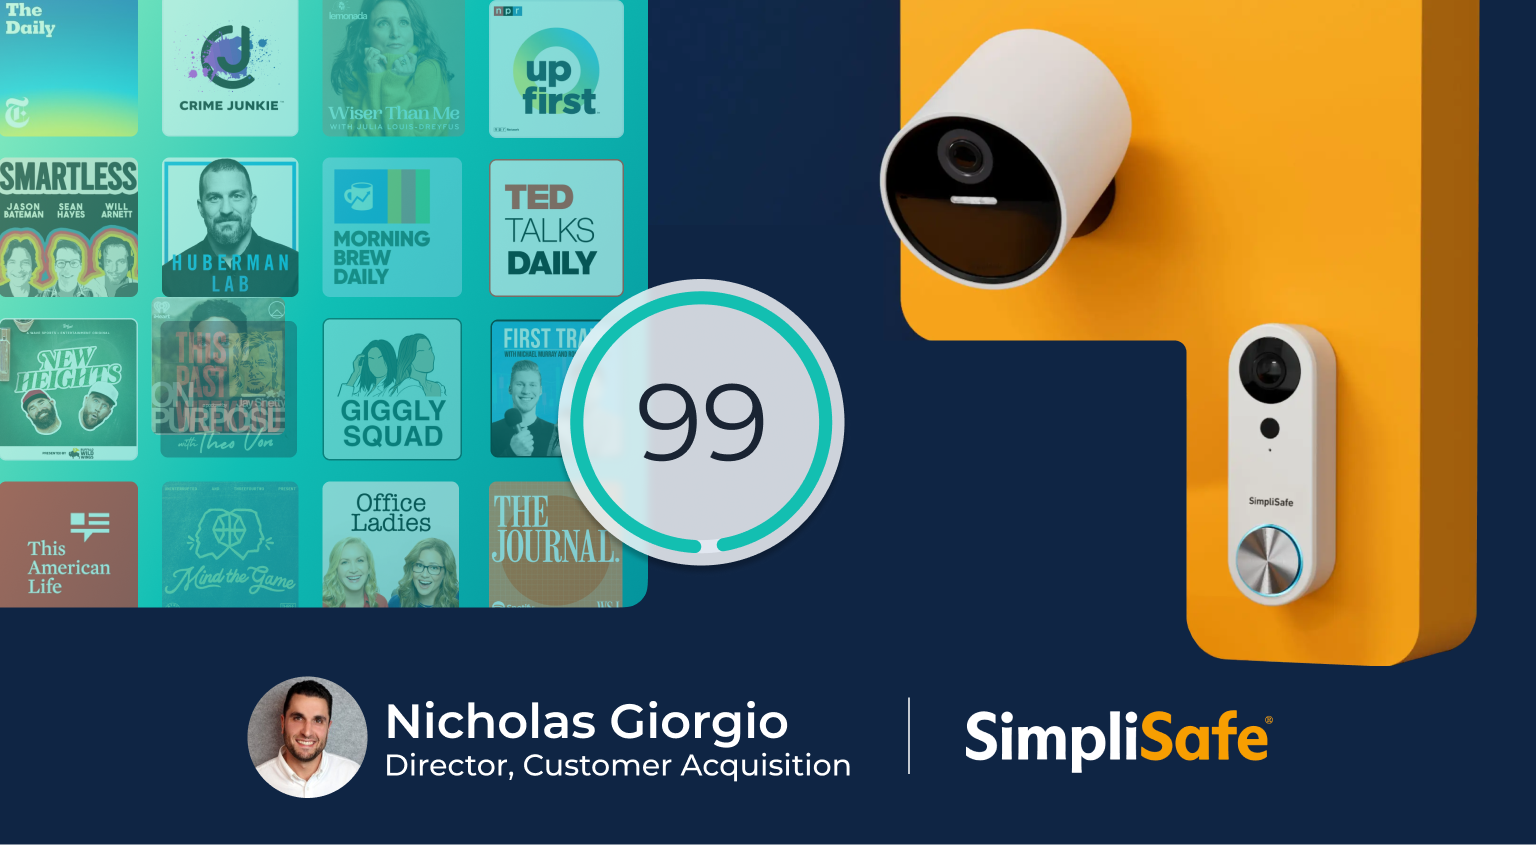 SimpliSafe uses SeekrAlign to grow podcast advertising reach